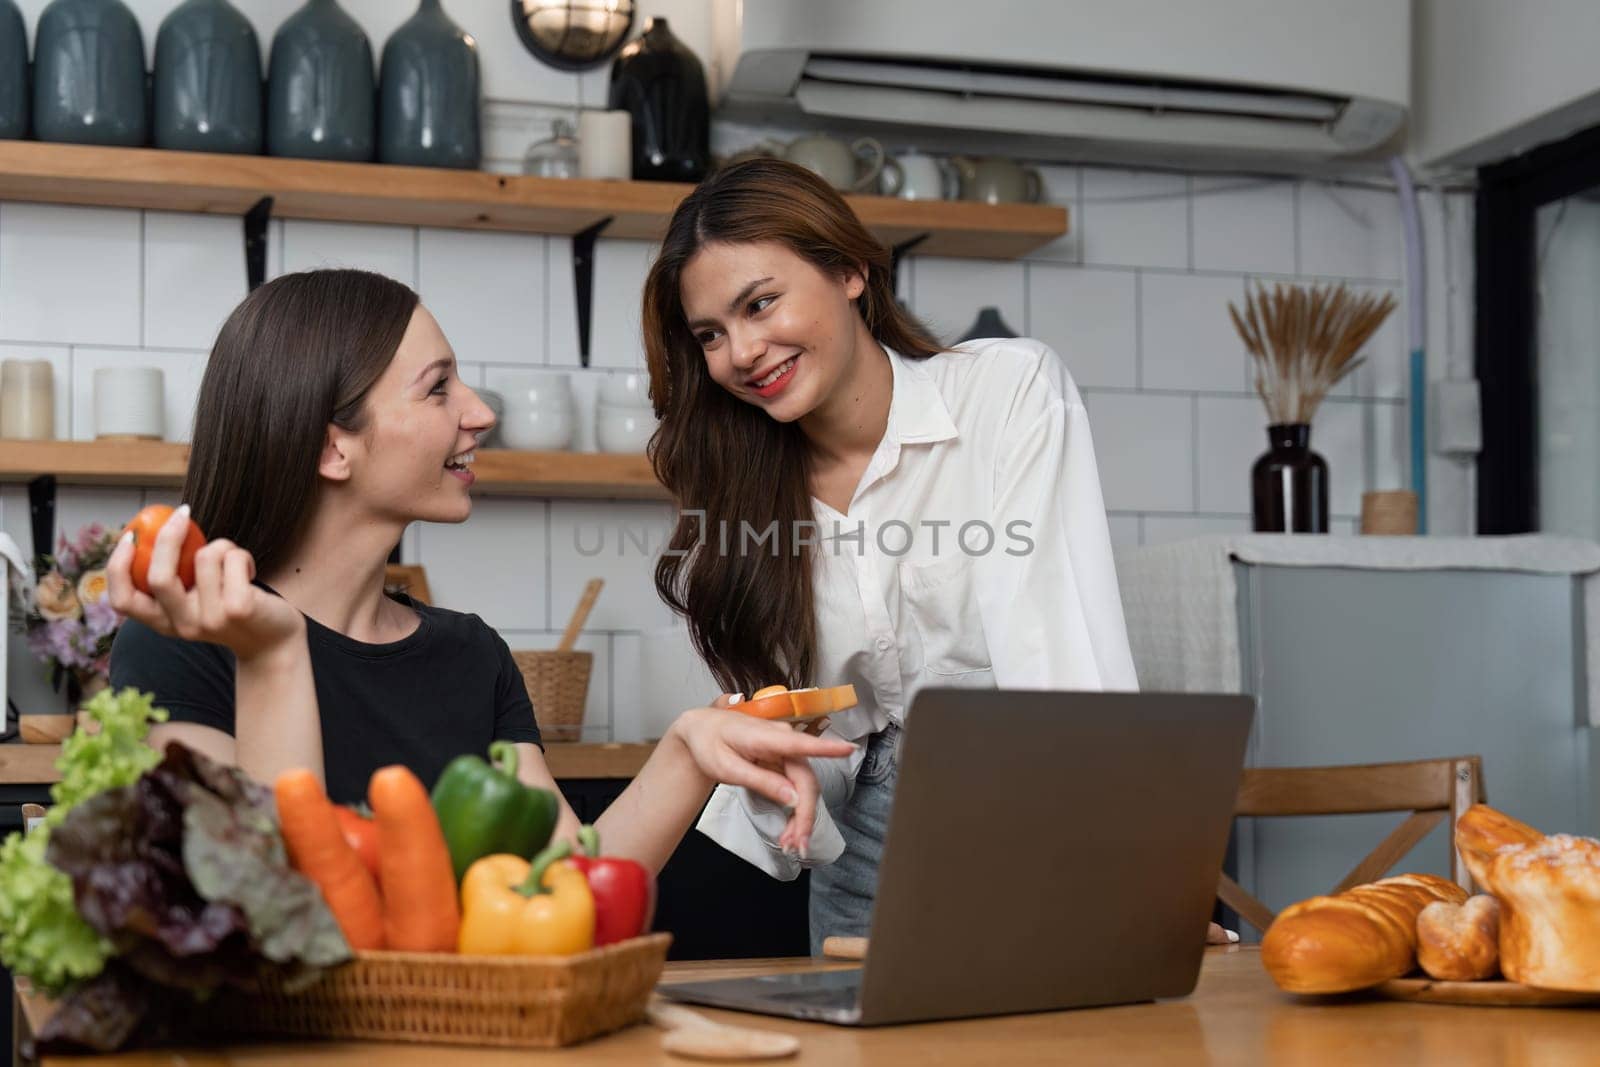 girl chef helping each other to cook healthy food of salad from tasty organic vegetable by learning recipe instruction from online diet course on laptop by nateemee